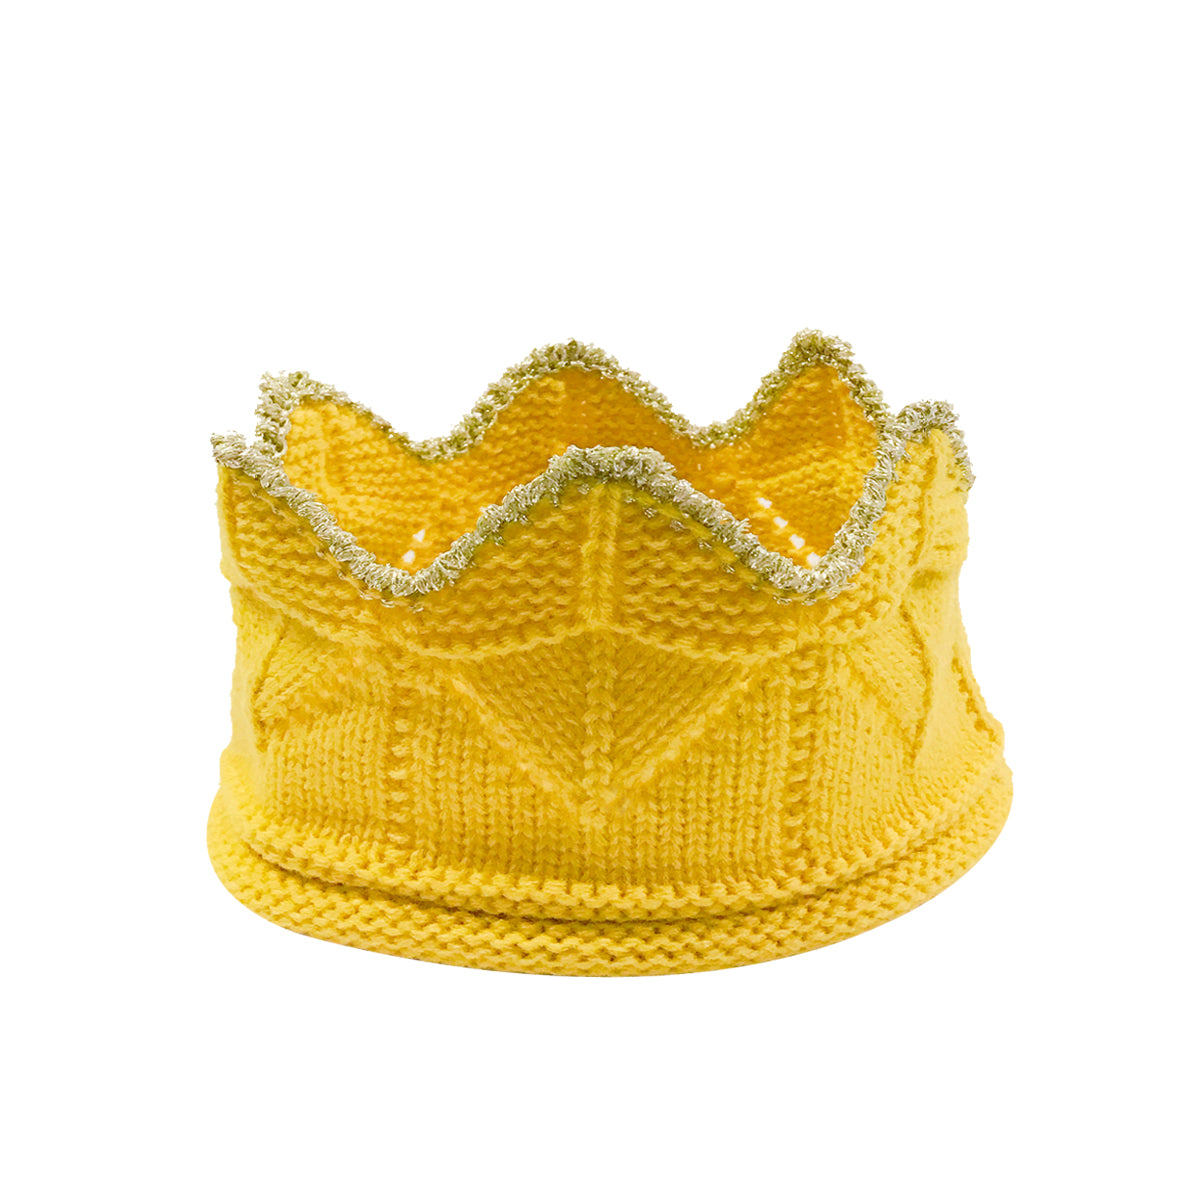 Wrapables Baby Boy & Girl Birthday Party Crochet Knitted Crown Headband Hat with Gold Trim